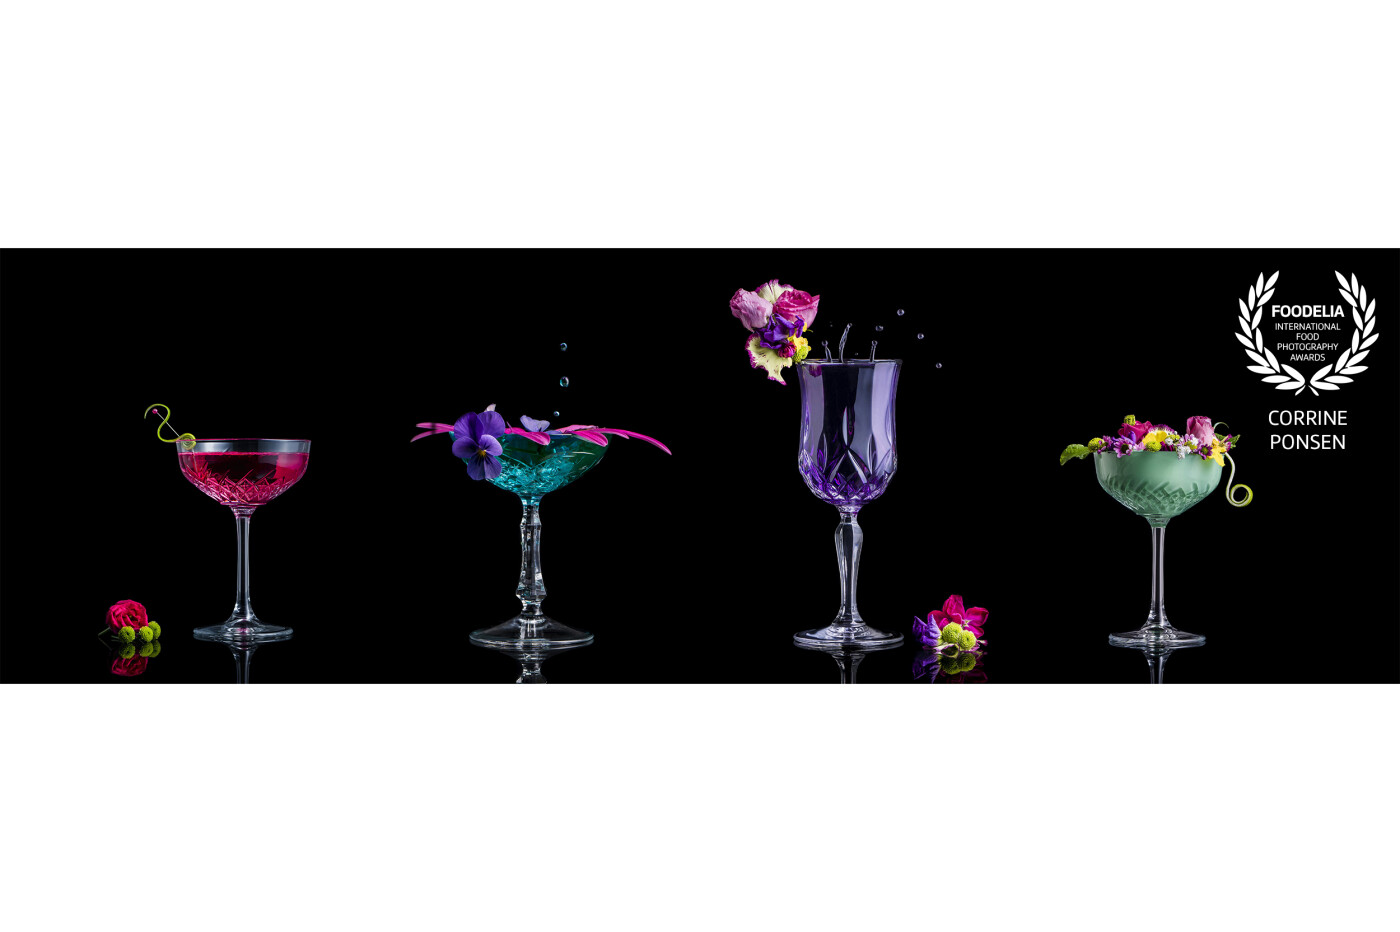 Colorfull cocktails blend together in 1 image. This is a composite of 4 pictures. Photographing at a black background en black reflecting surface. I made each picture with just 1 flash and bounce screen.